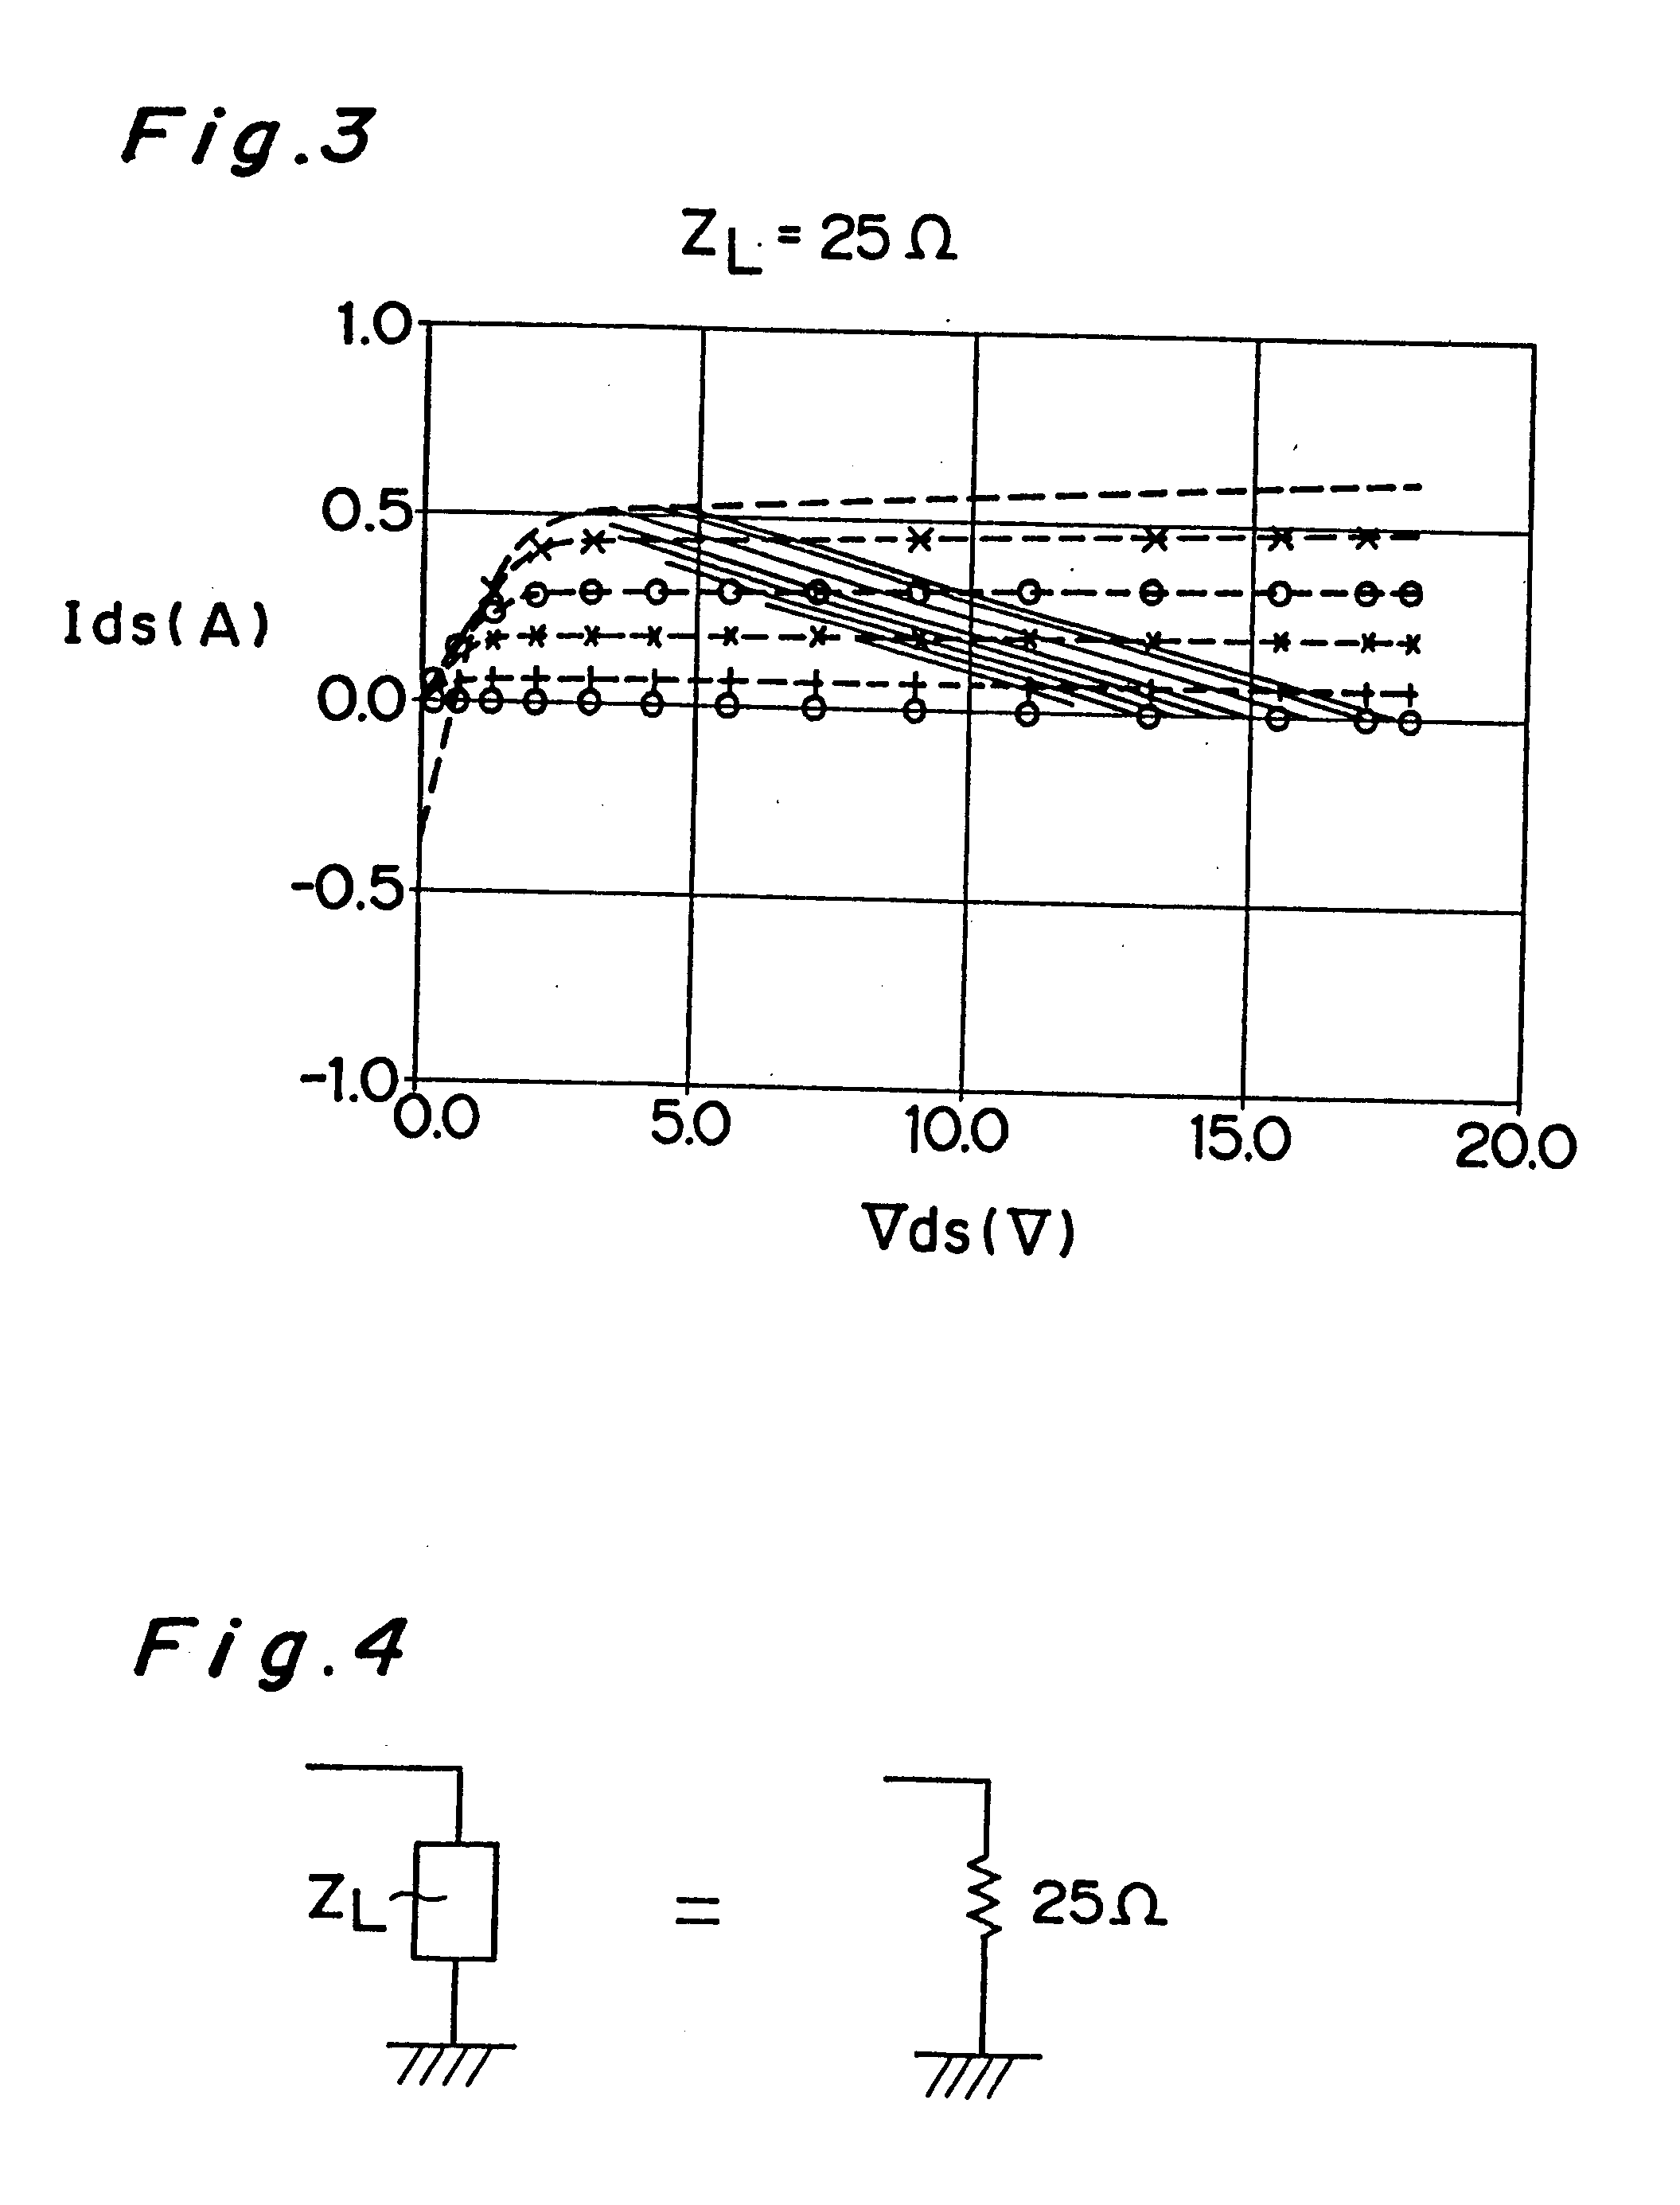 Microwave transistor subjected to burn-in testing